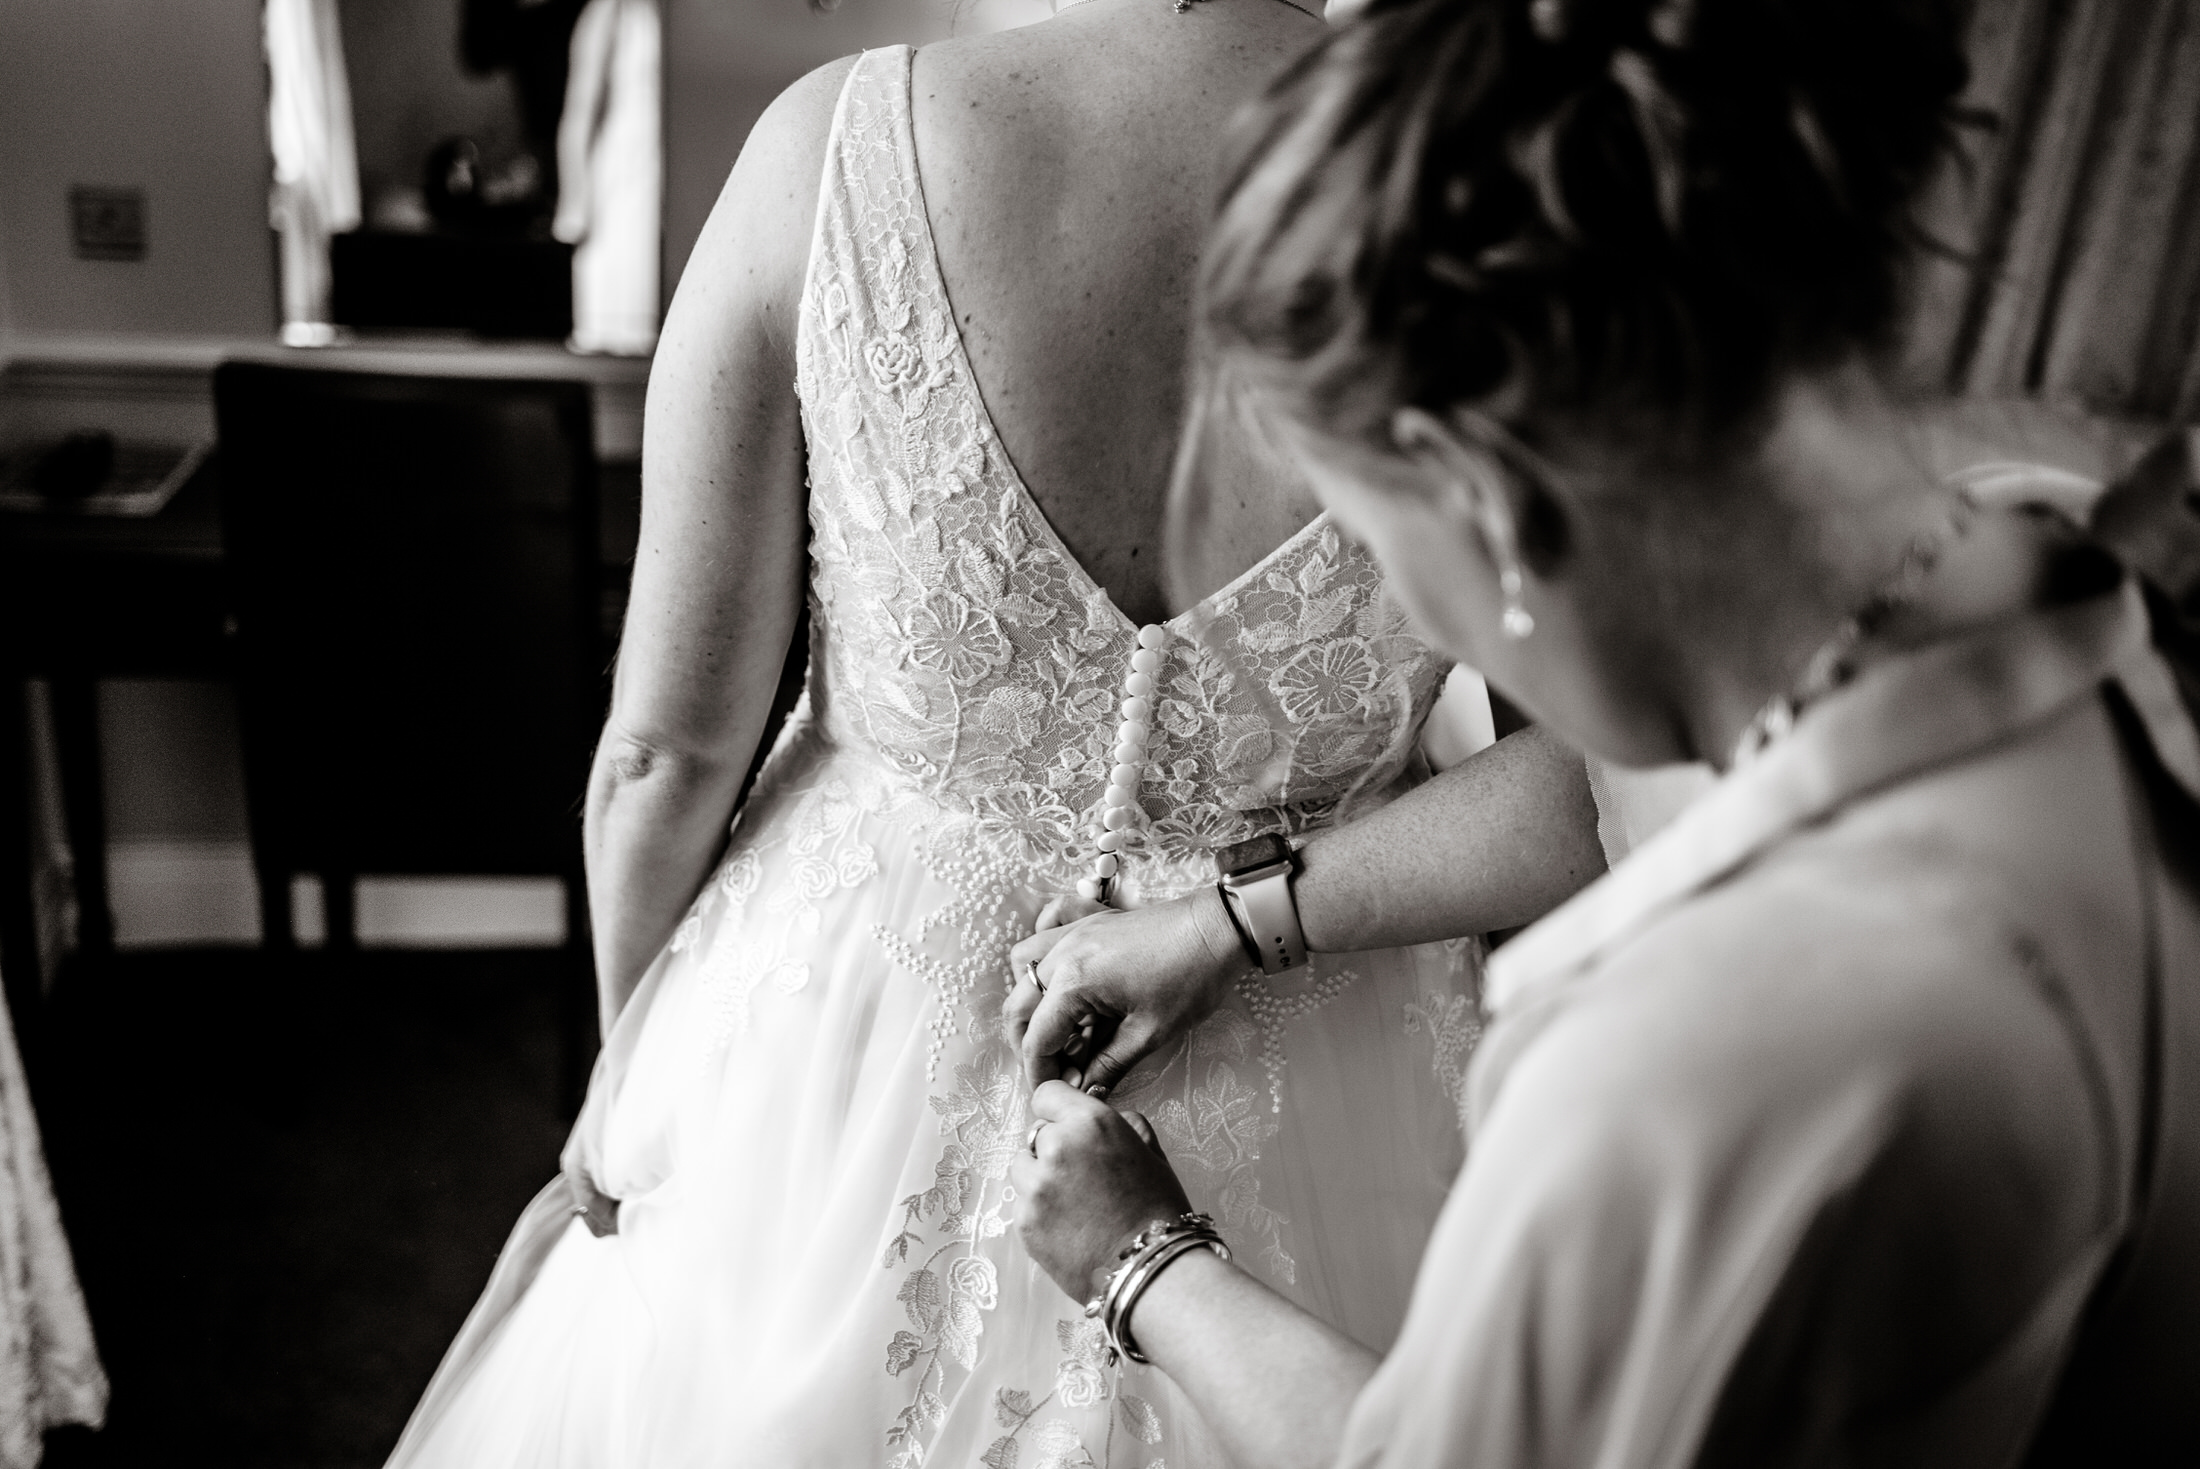 A woman is helping a bride into her wedding dress at the Brackenborough Hotel.